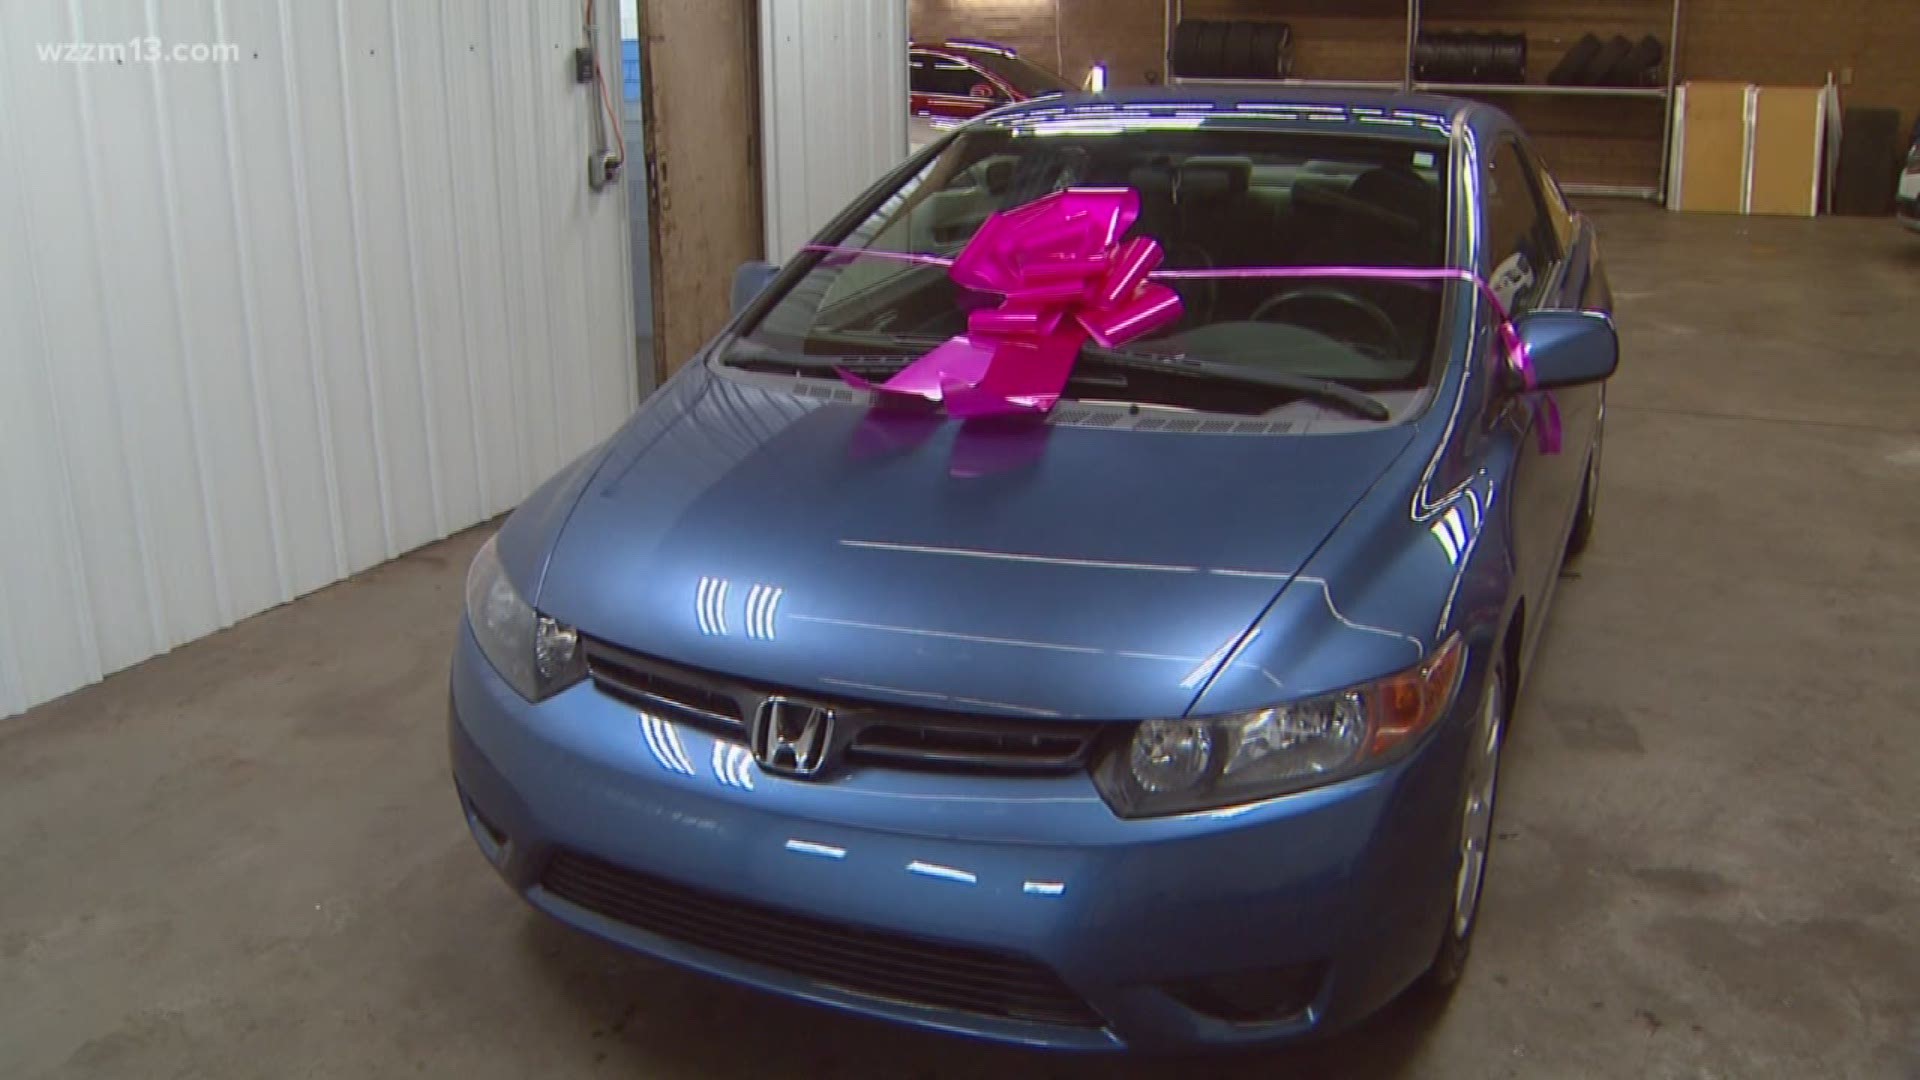 OML: Muskegon man inspires kindness with a car